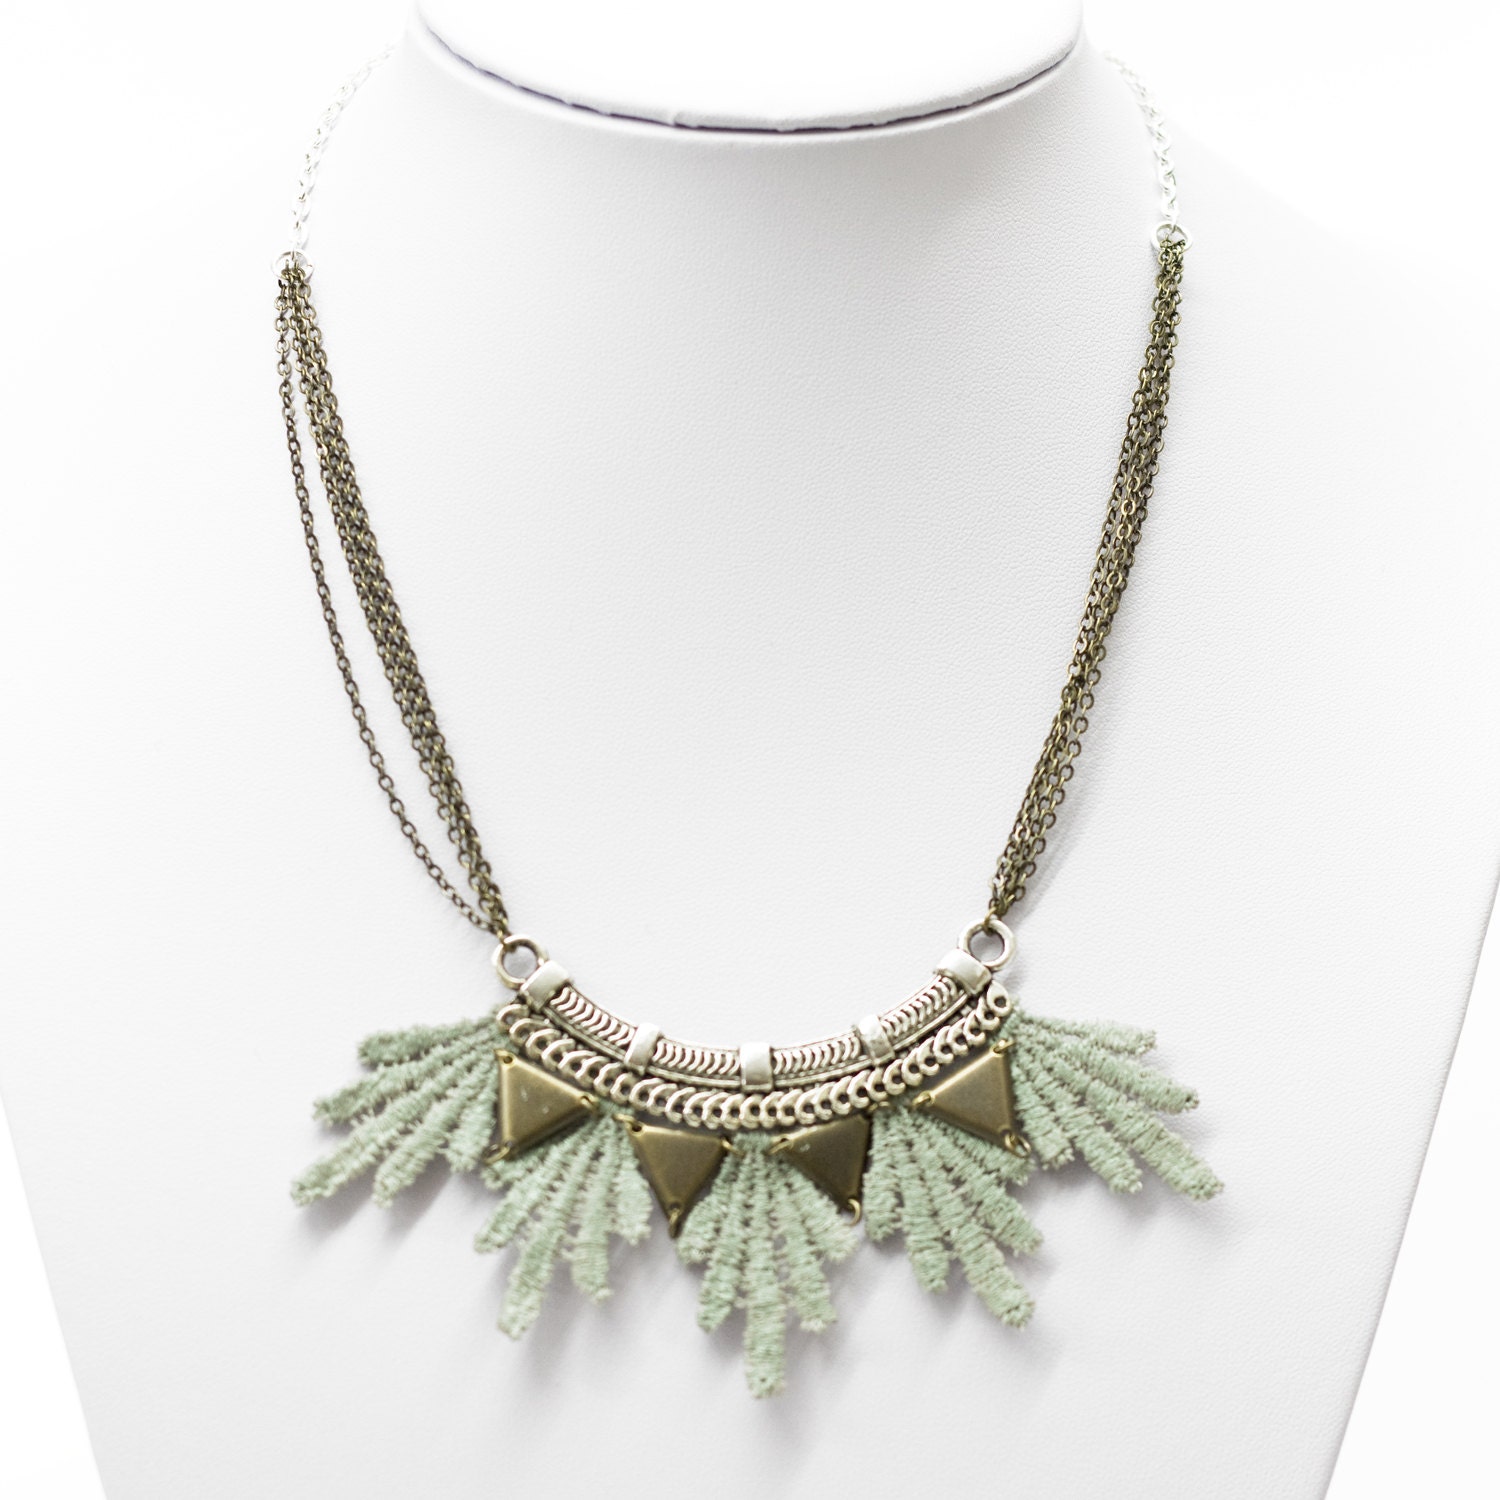 Lace necklace - Aura - Iridescent mint with bronze & silver